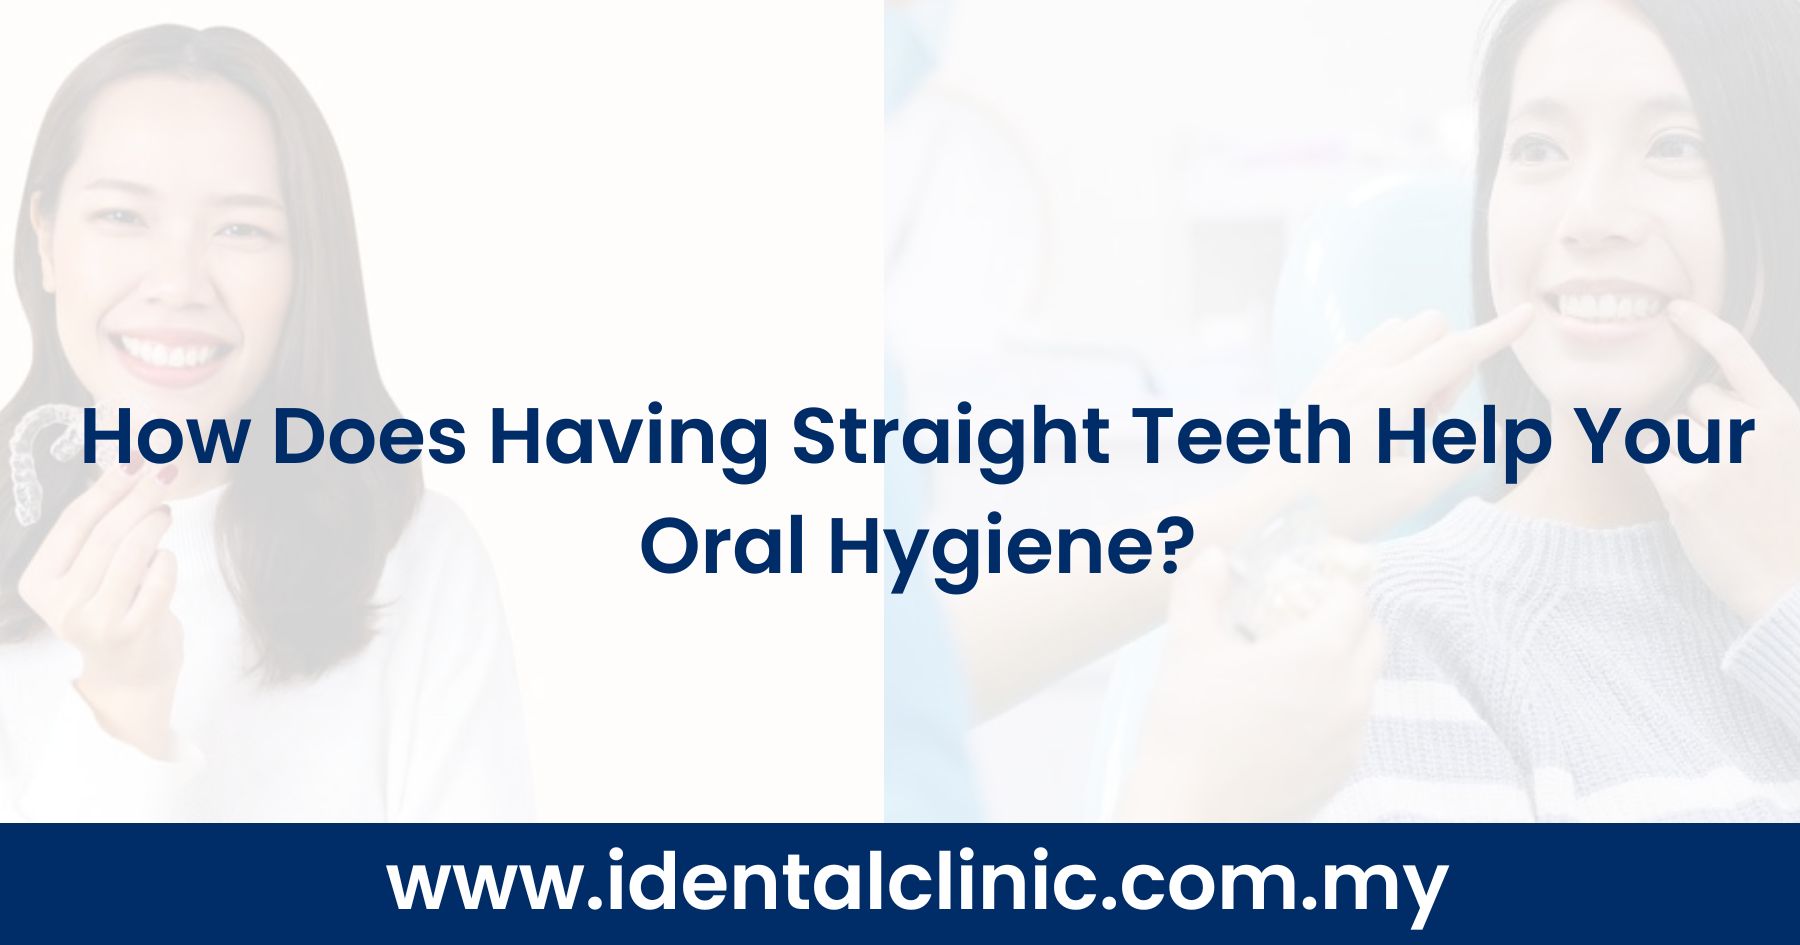 How Does Having Straight Teeth Help Your Oral Hygiene?